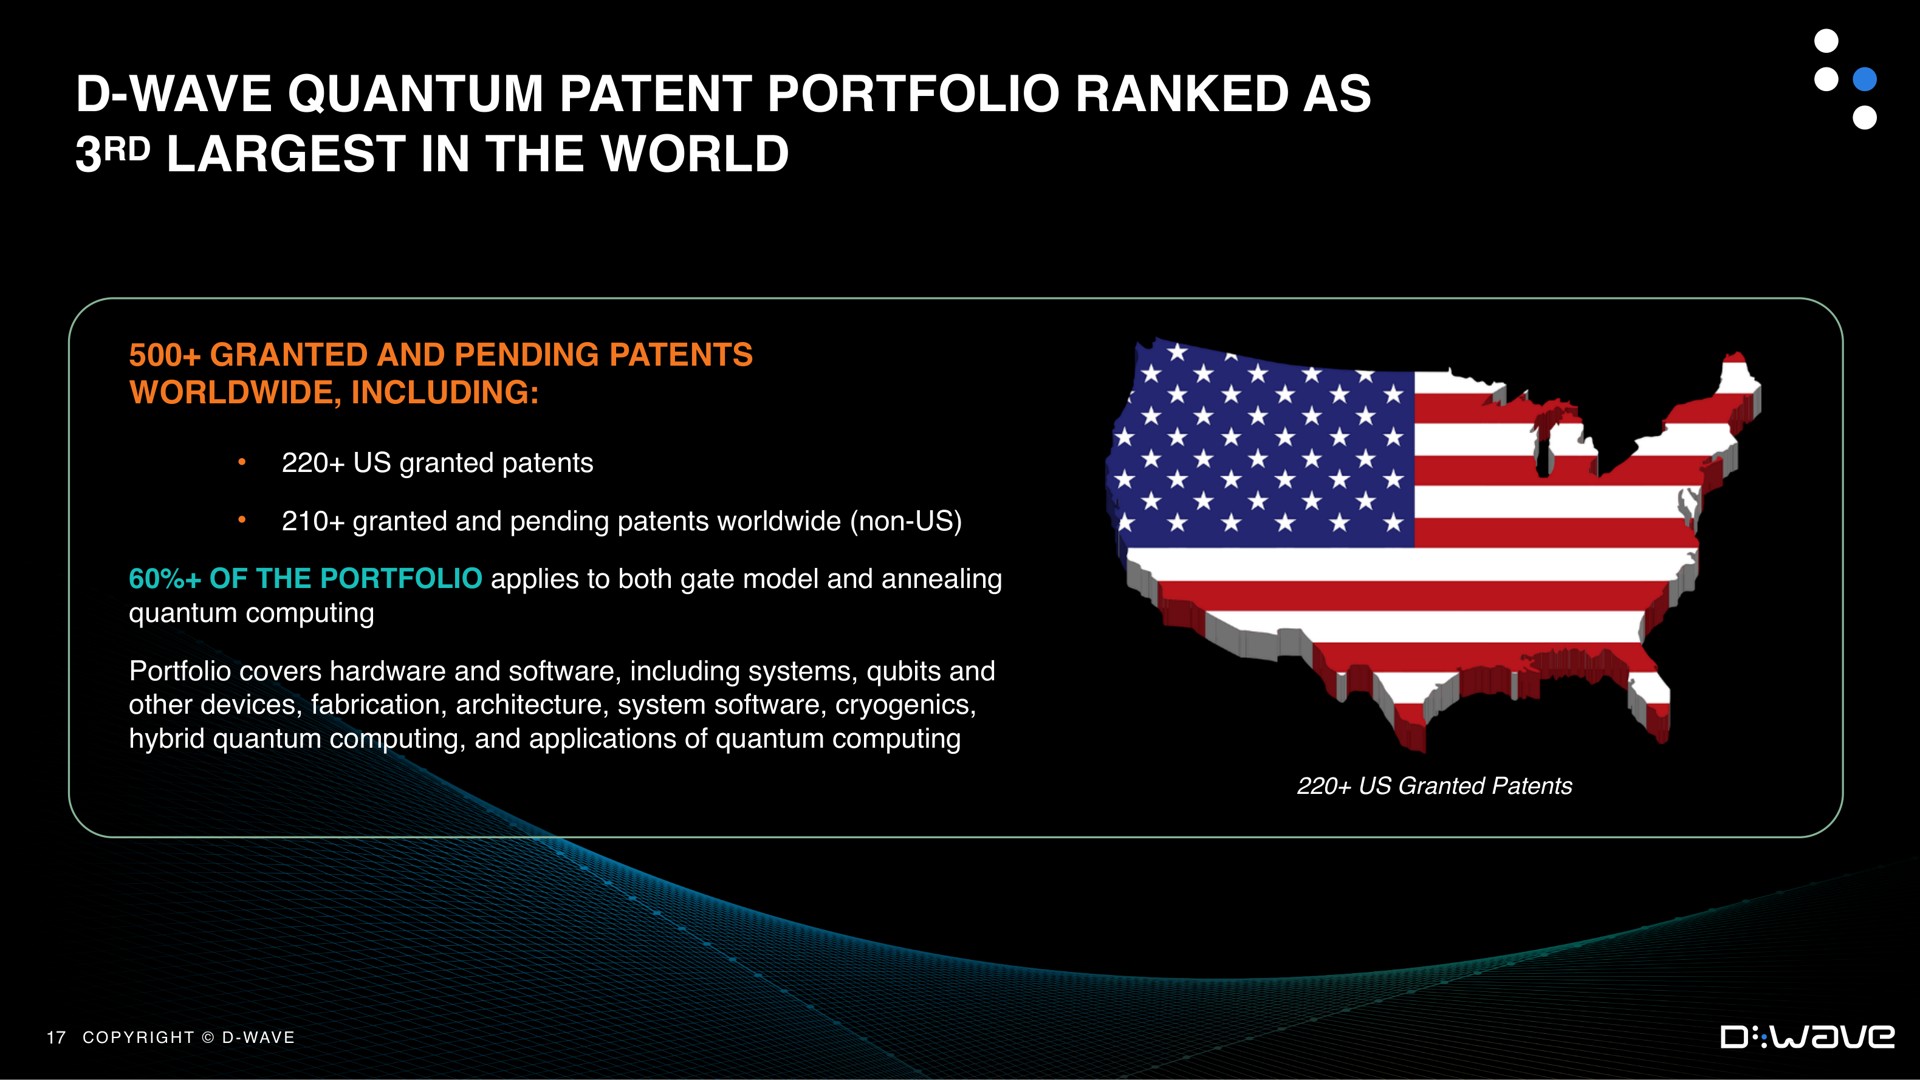 wave quantum patent portfolio ranked as in the world | D-Wave